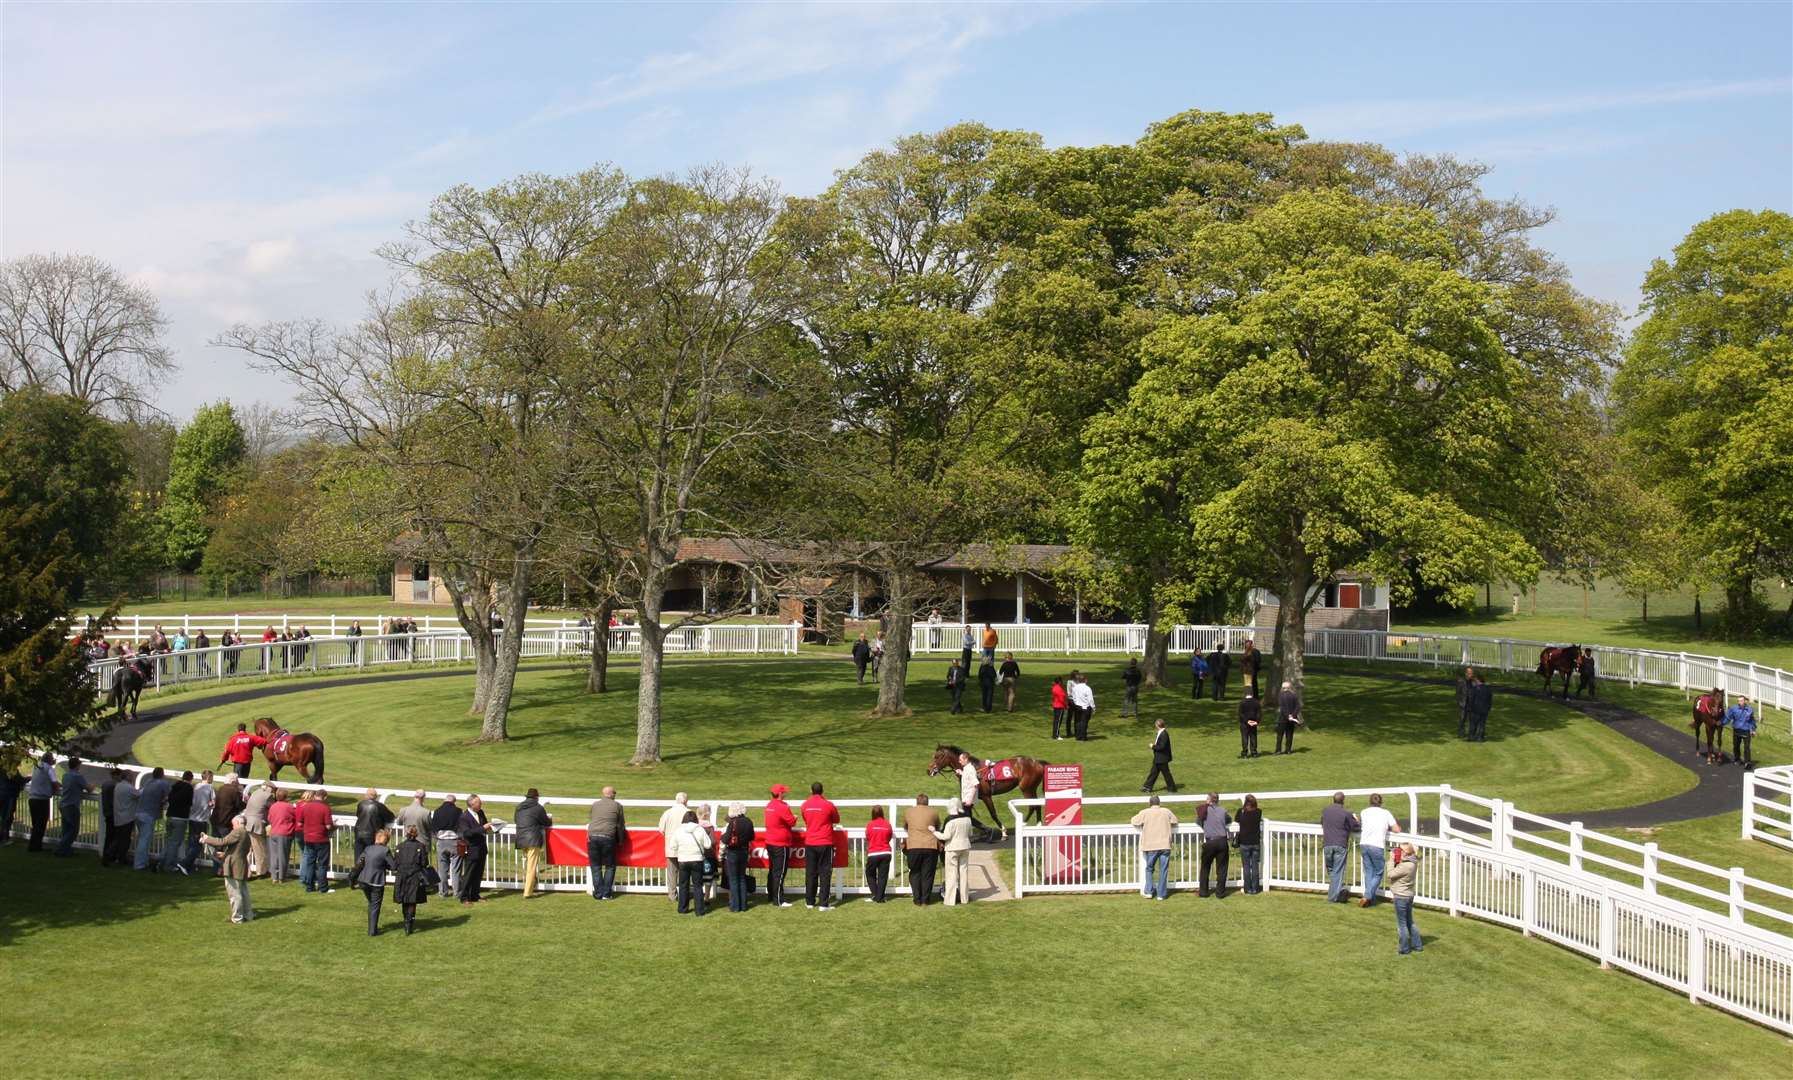 The parade ring and paddock at Folkestone Racecourse in May 2009. Picture: Chris Denham